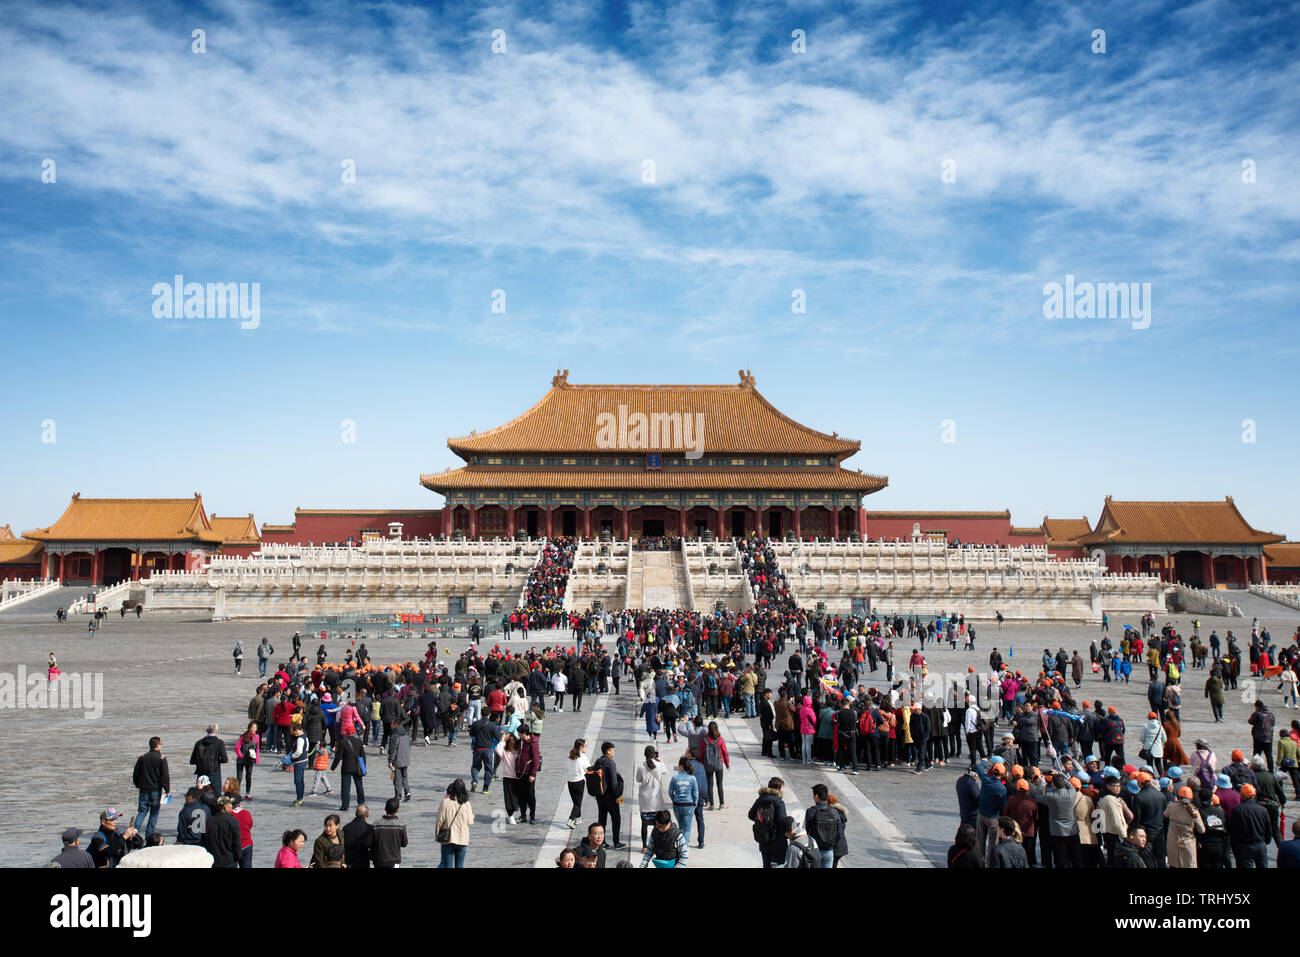 BEIJING, CHINA - APR 14: Scene at Forbidden City in Beijing, China on April 14, 2018. The palace complex served as the the royal grounds for about 500 Stock Photo